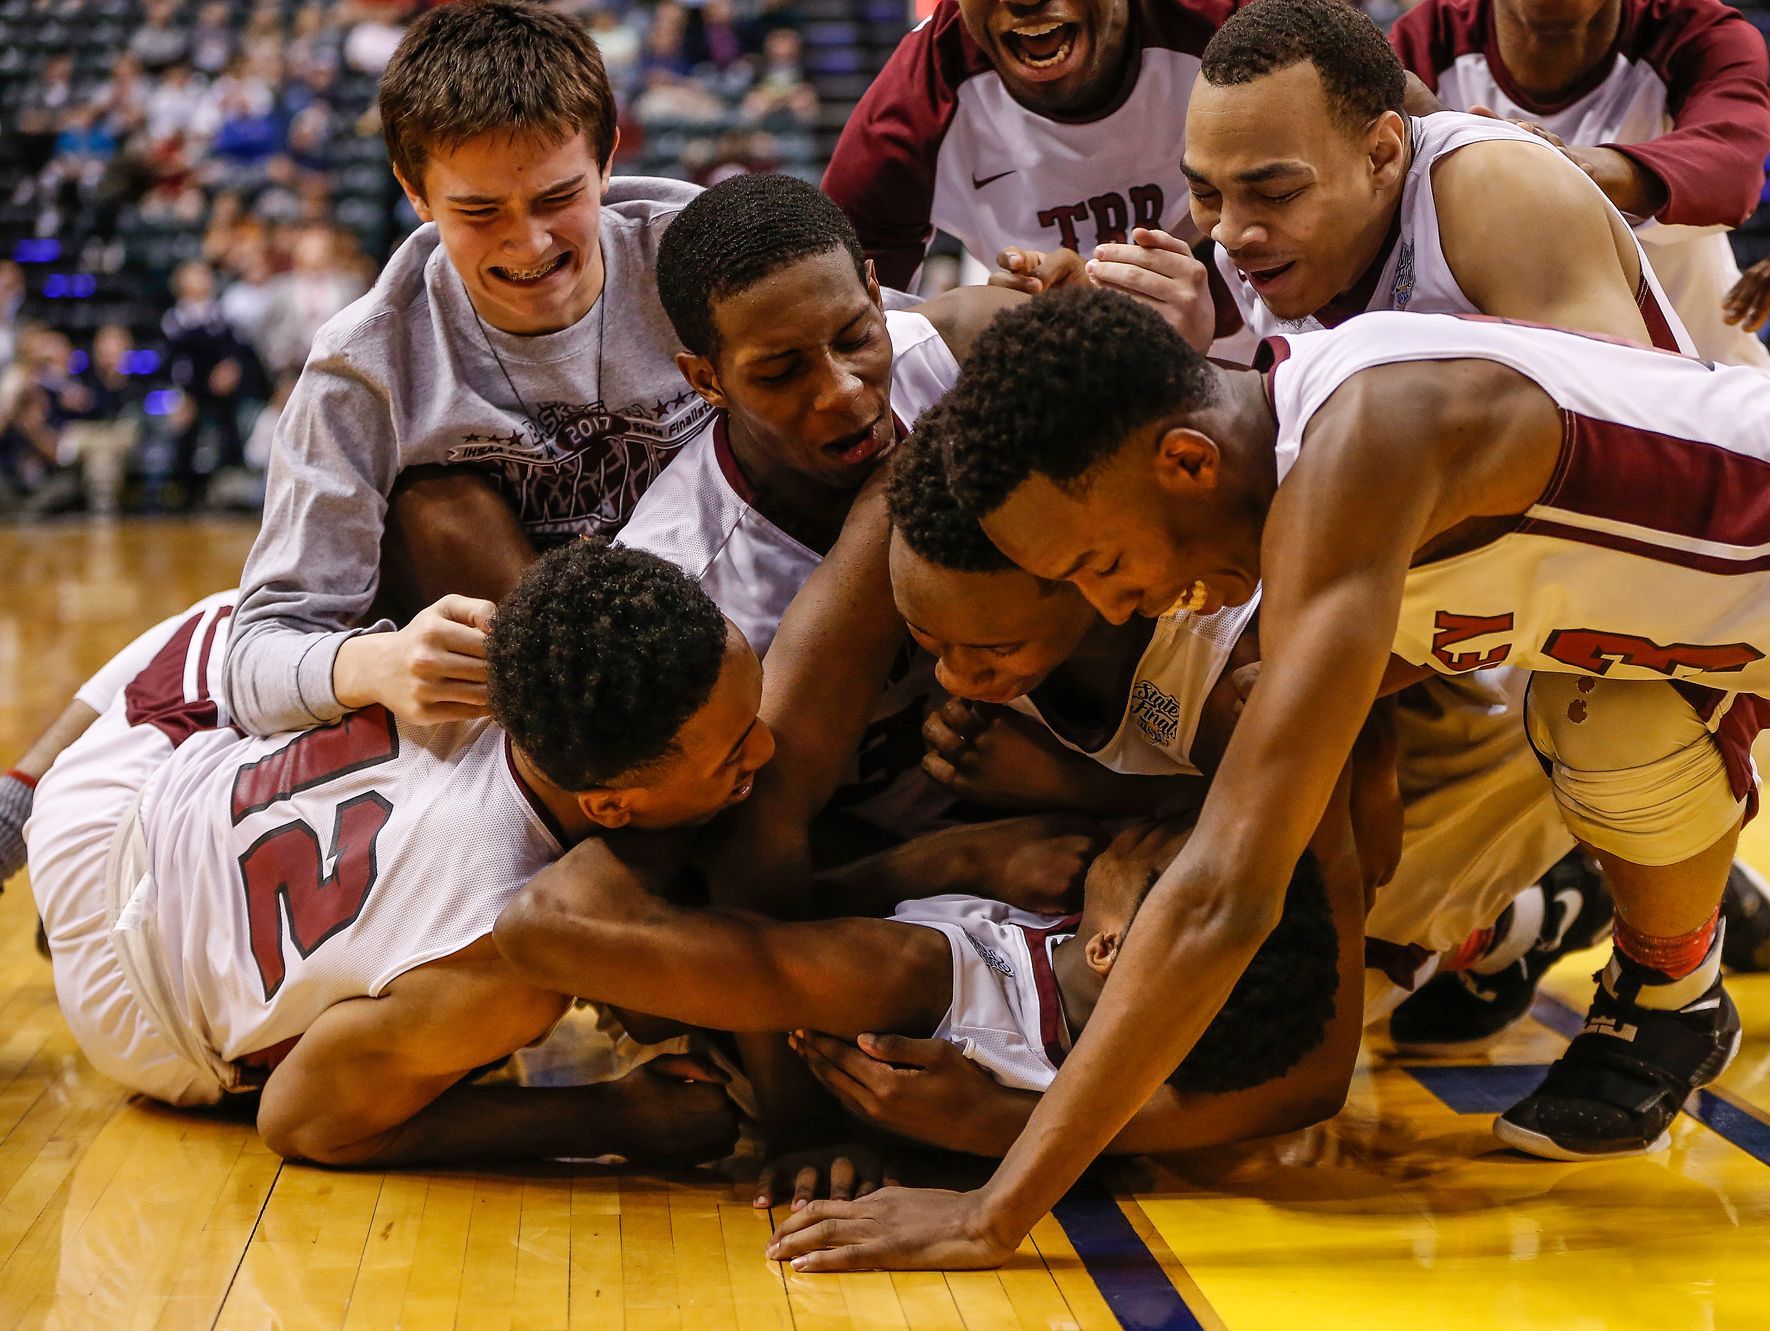 The Tindley Tigers bench clears as they tackle the Tigers’ Hunter White (3) after he connected on a short jumper that put the Tigers up 51-49 over the Lafayette Central Catholic Knights as the time ticked off the clock in the fourth quarter during the IHSAA Class A state championship game at Bankers Life Fieldhouse in Indianapolis on Saturday, March 25, 2017.